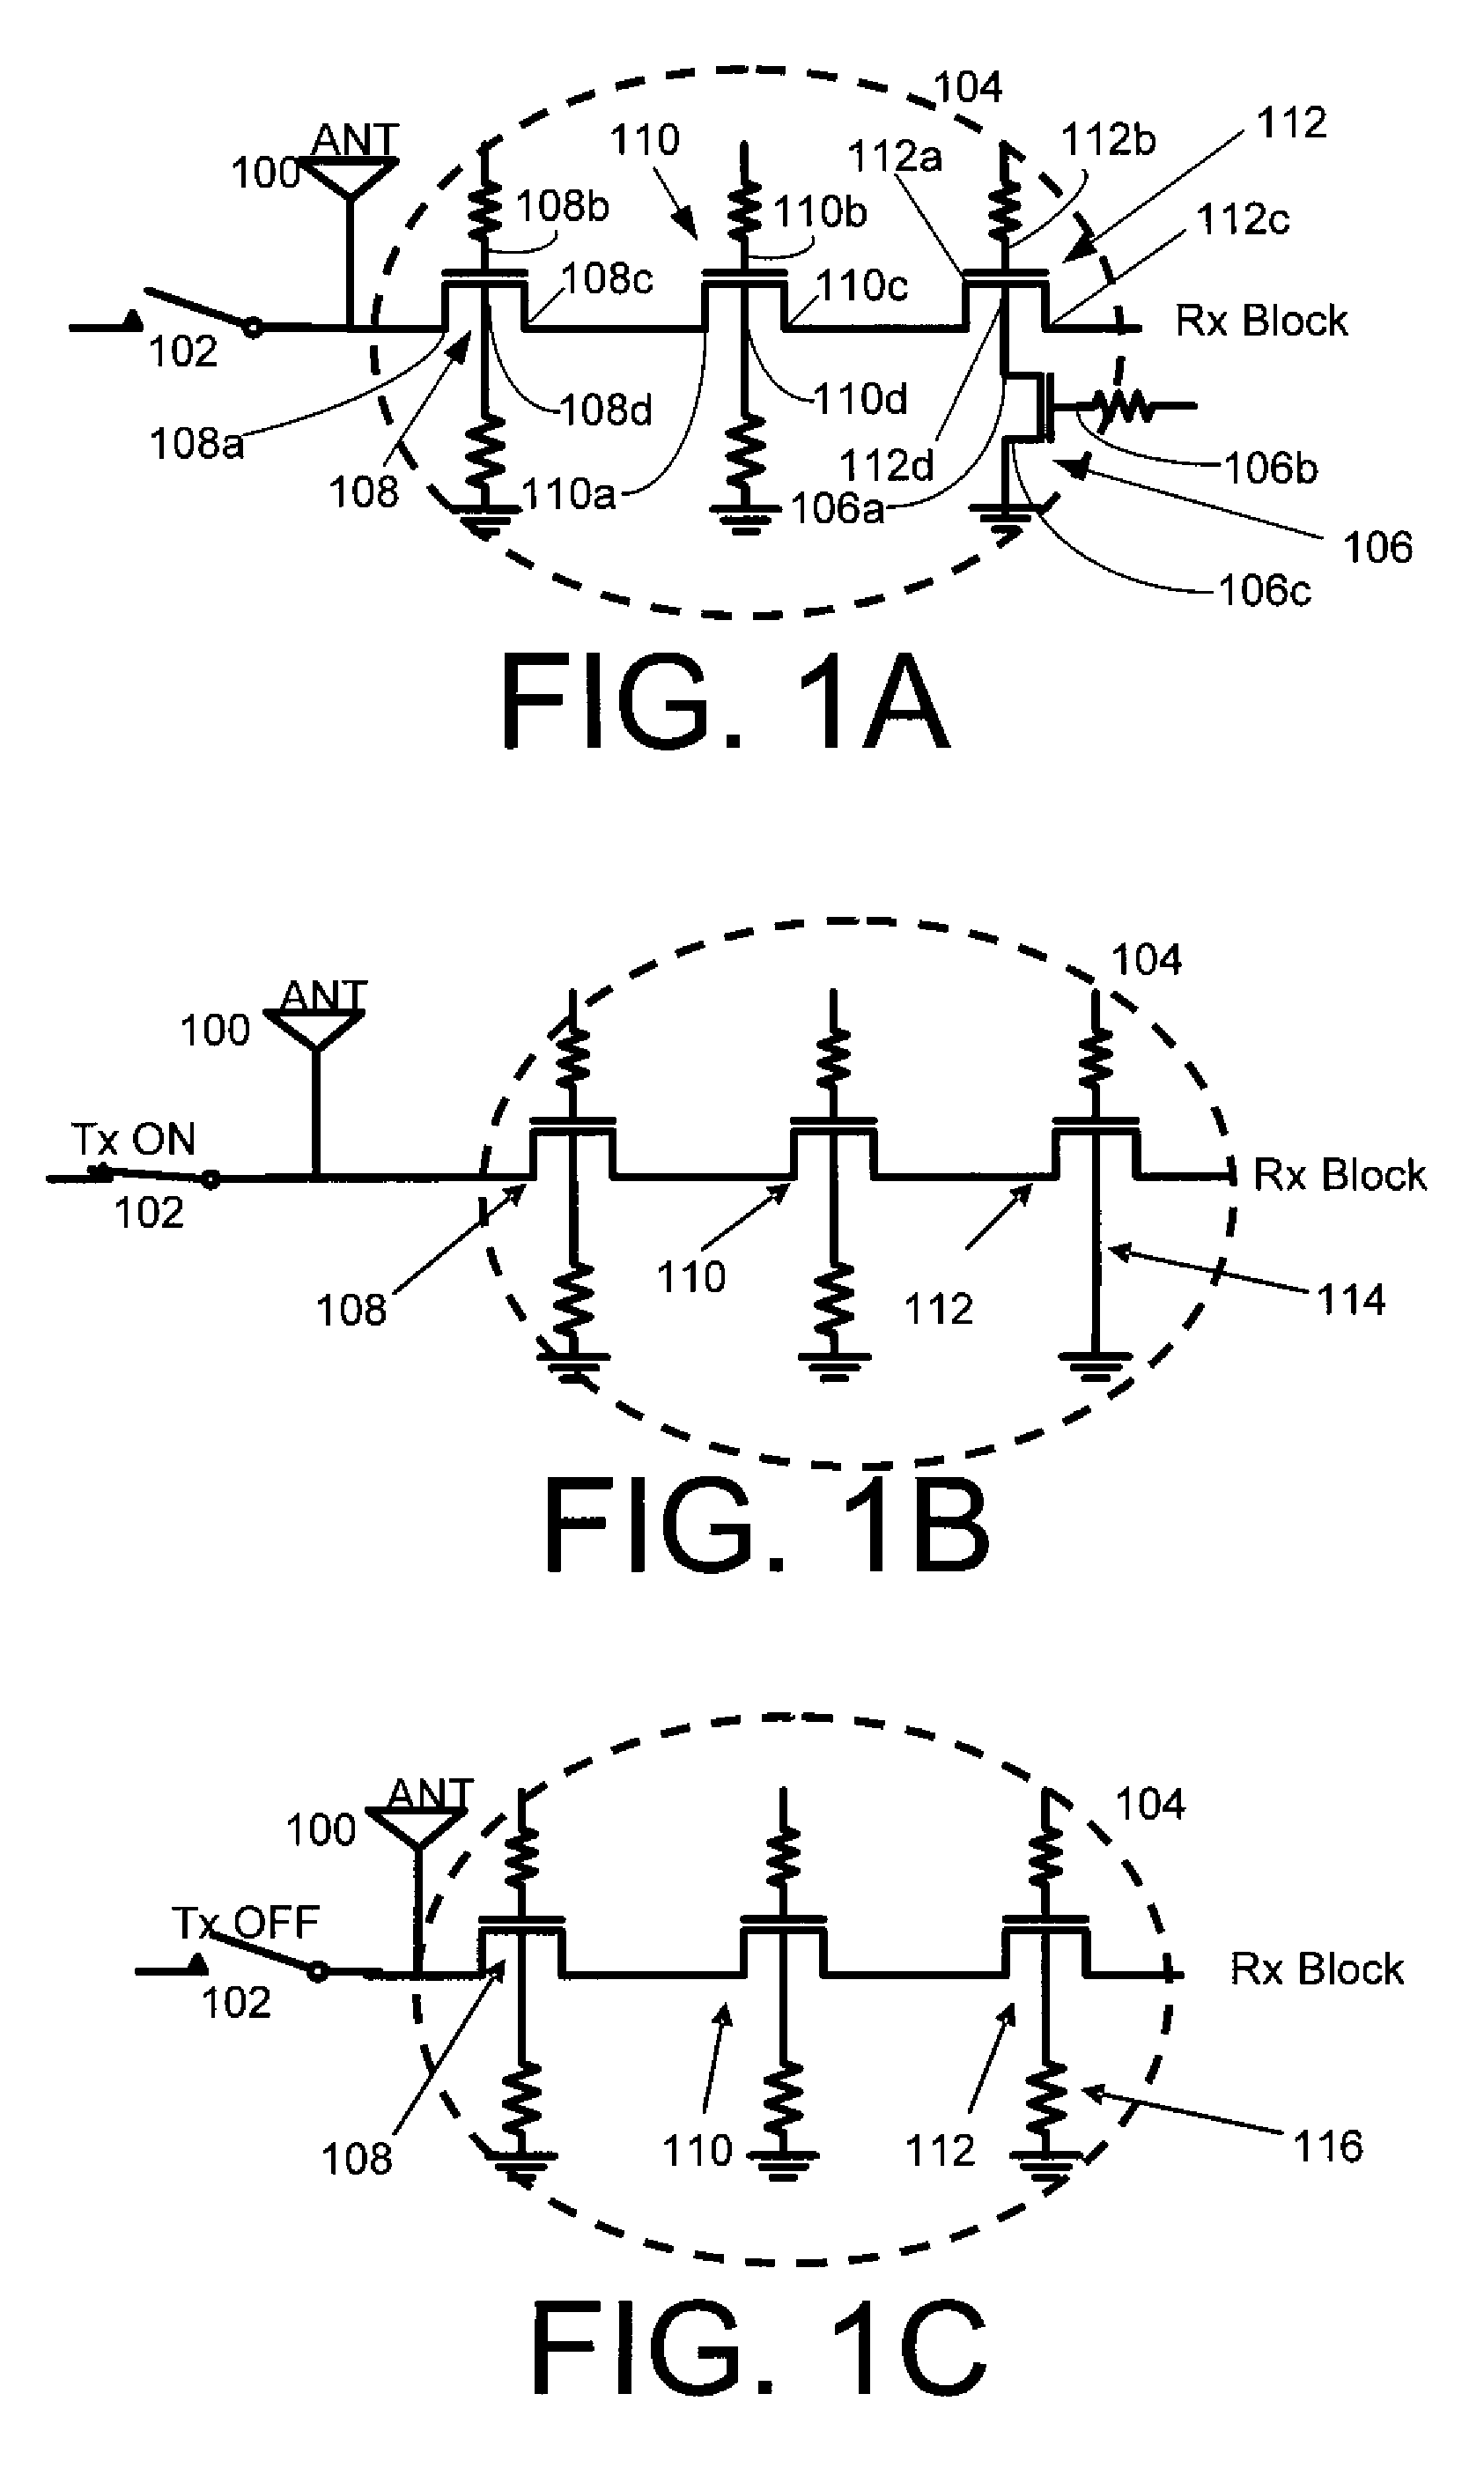 Systems, methods, and apparatuses for high power complementary metal oxide semiconductor (CMOS) antenna switches using body switching and substrate junction diode controlling in multistacking structure